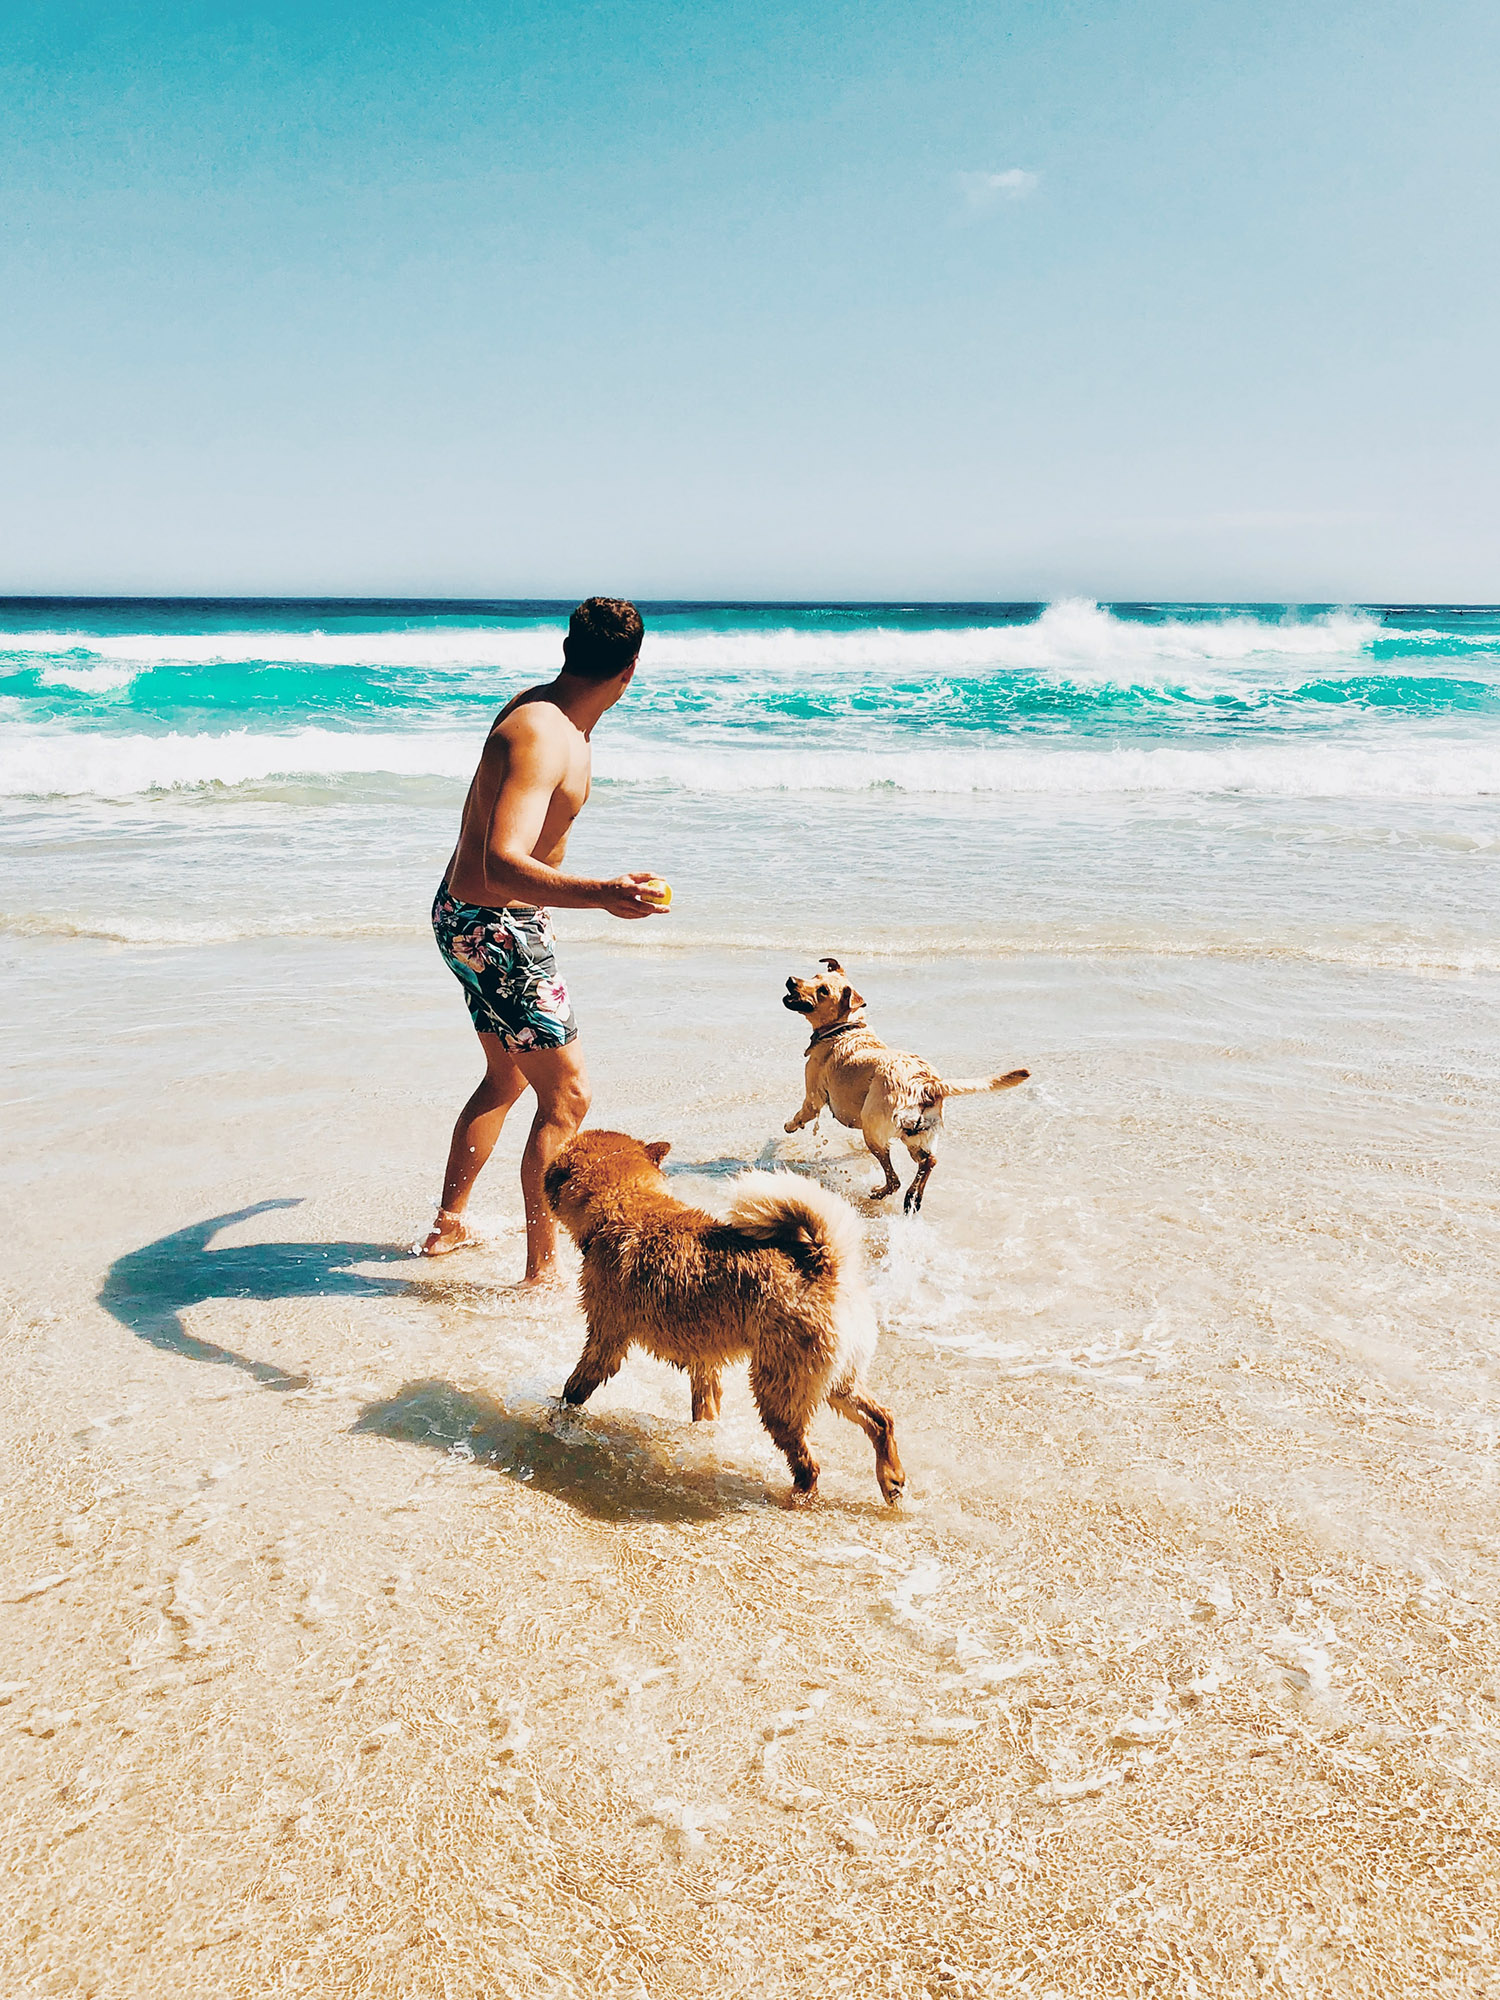 Travel Therapist on the beach, playing with their 2 dogs